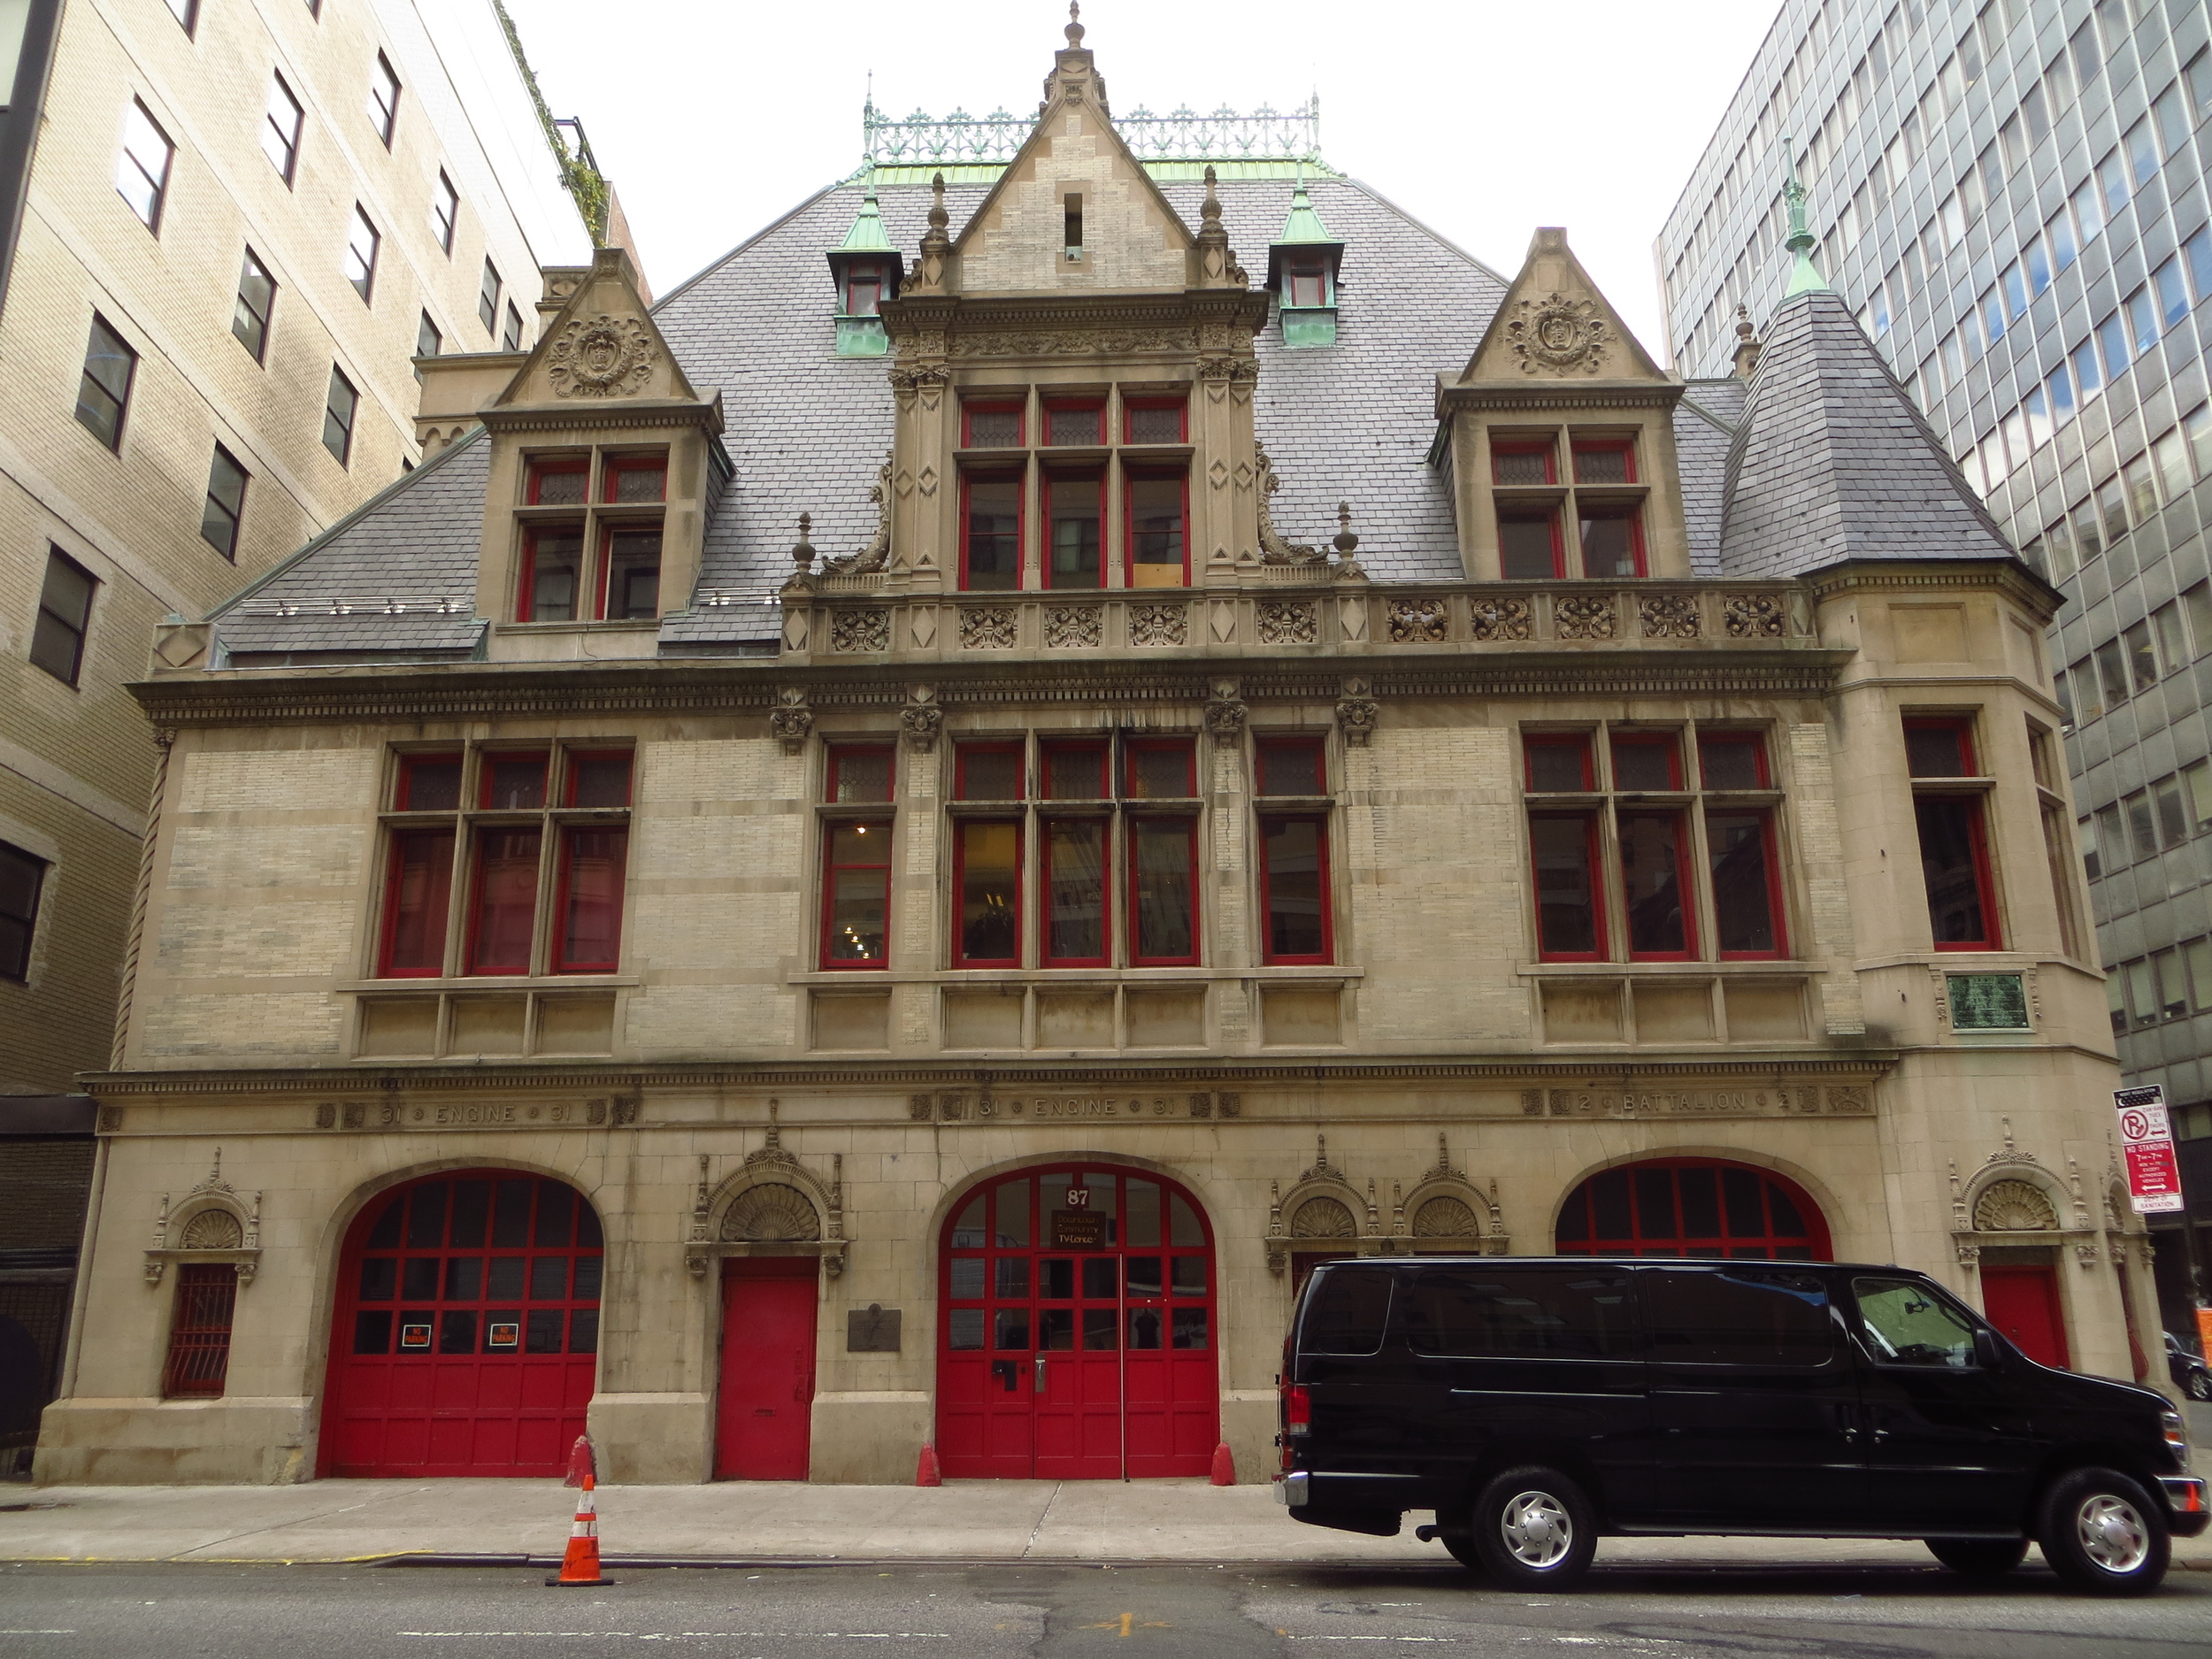 Cool old firehouse (b. 1895)